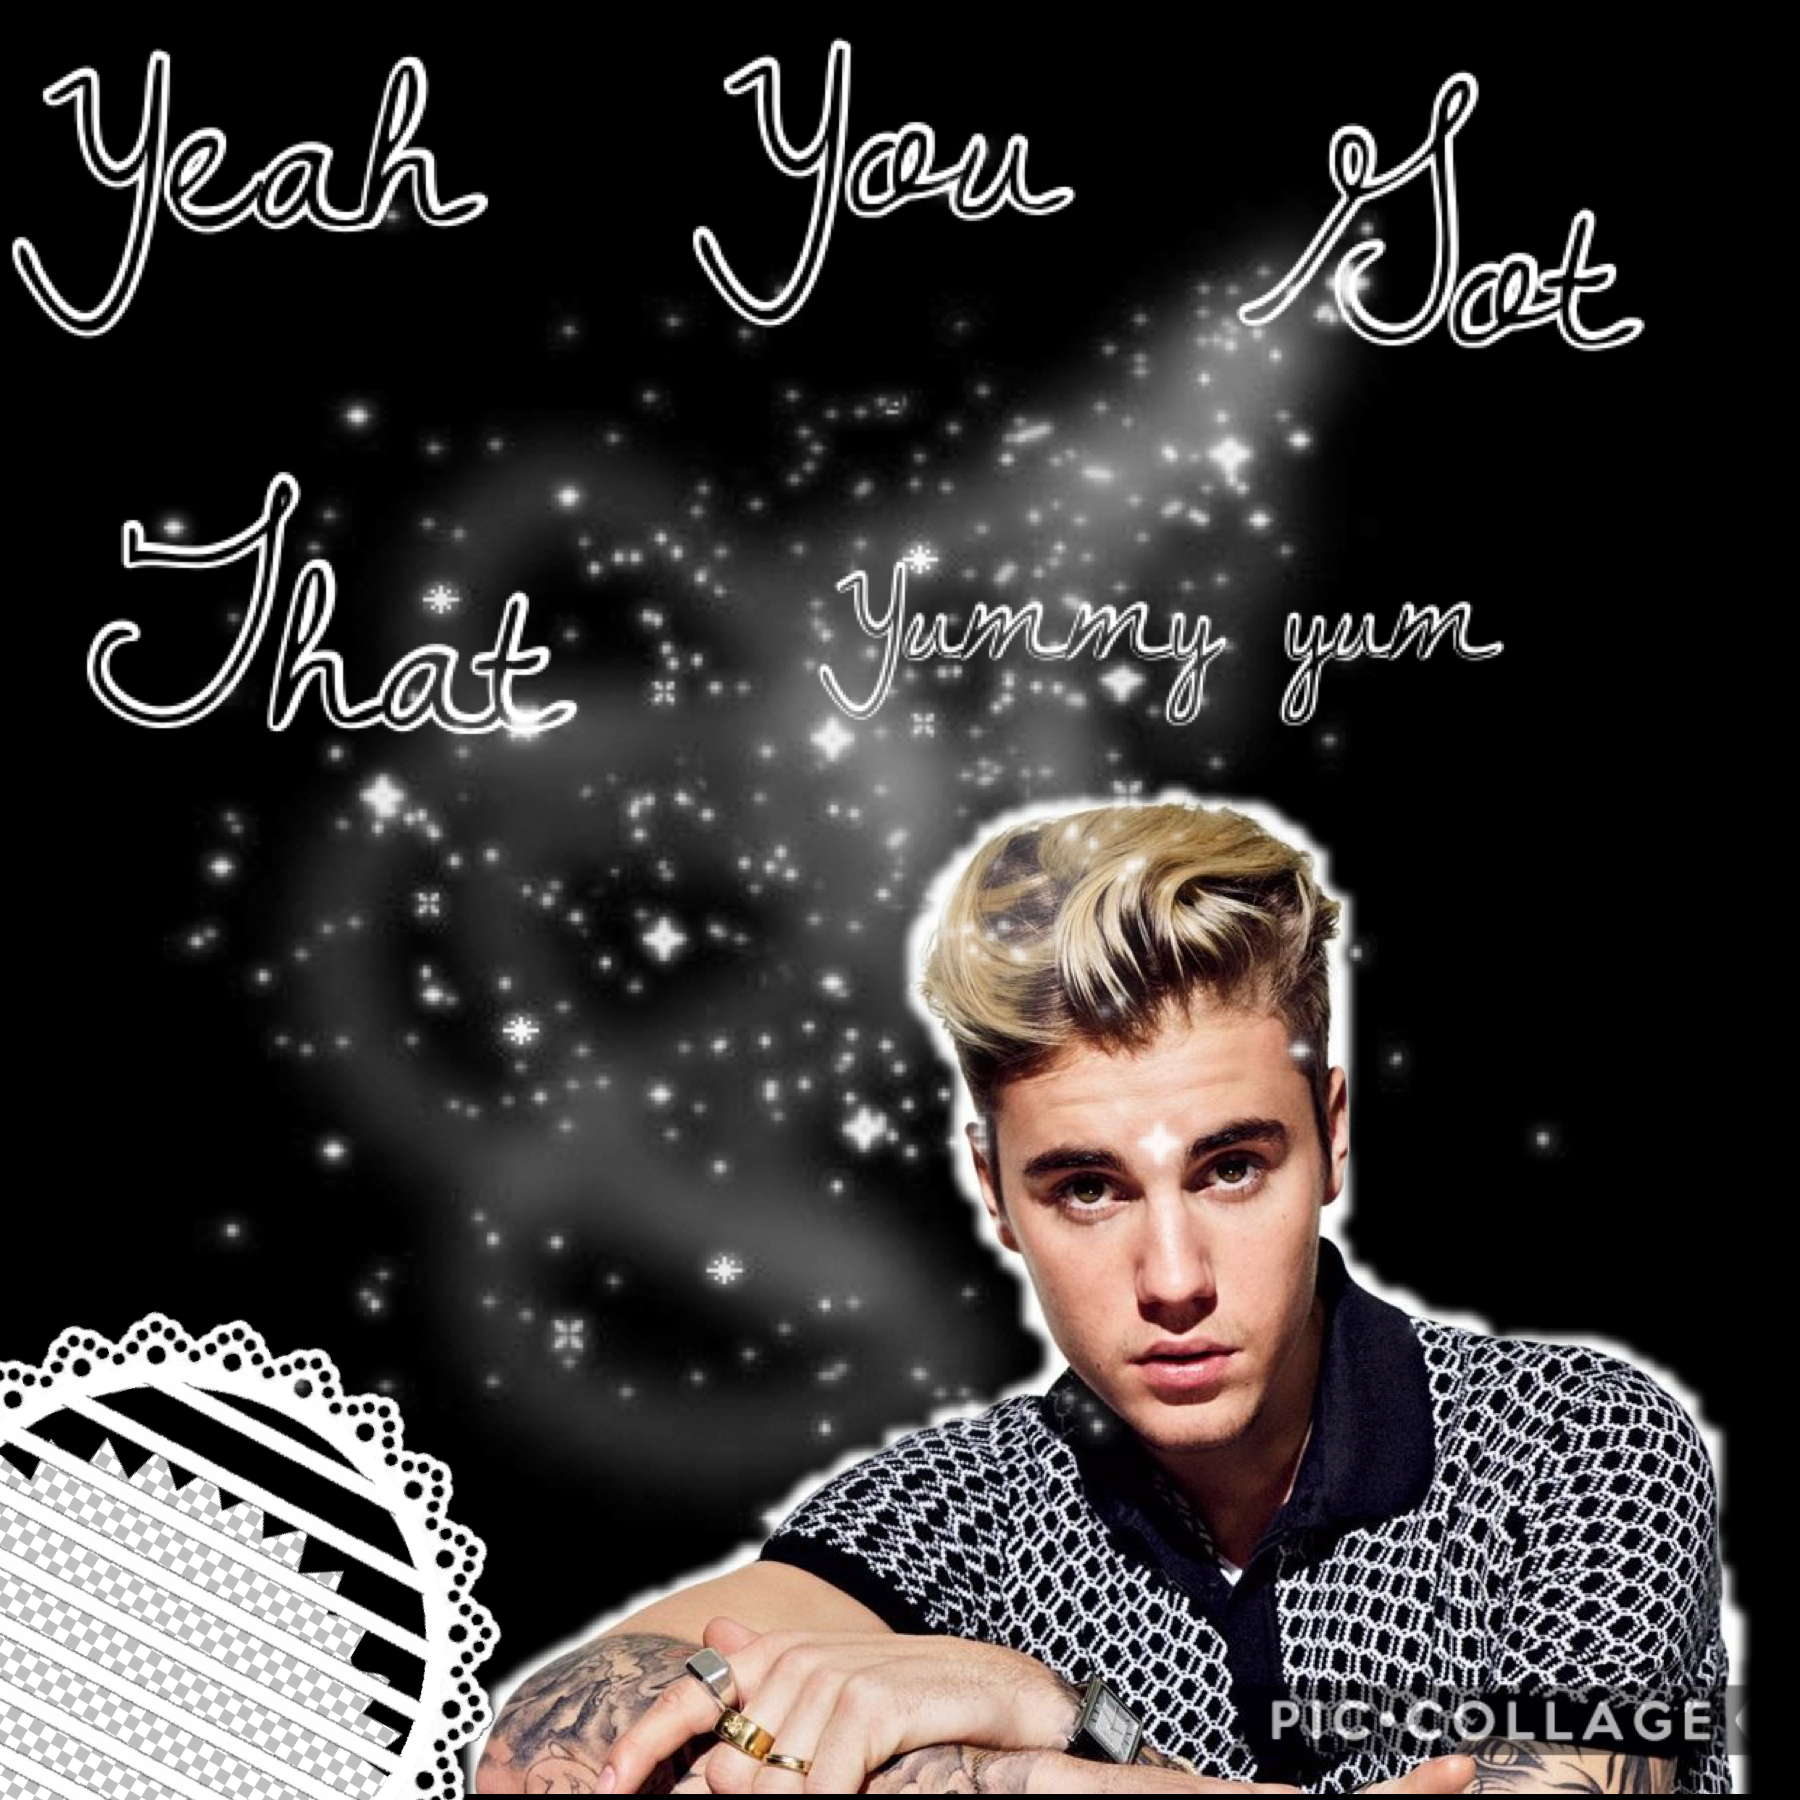 🖤 tap 🖤



Hope you like my jb collage 